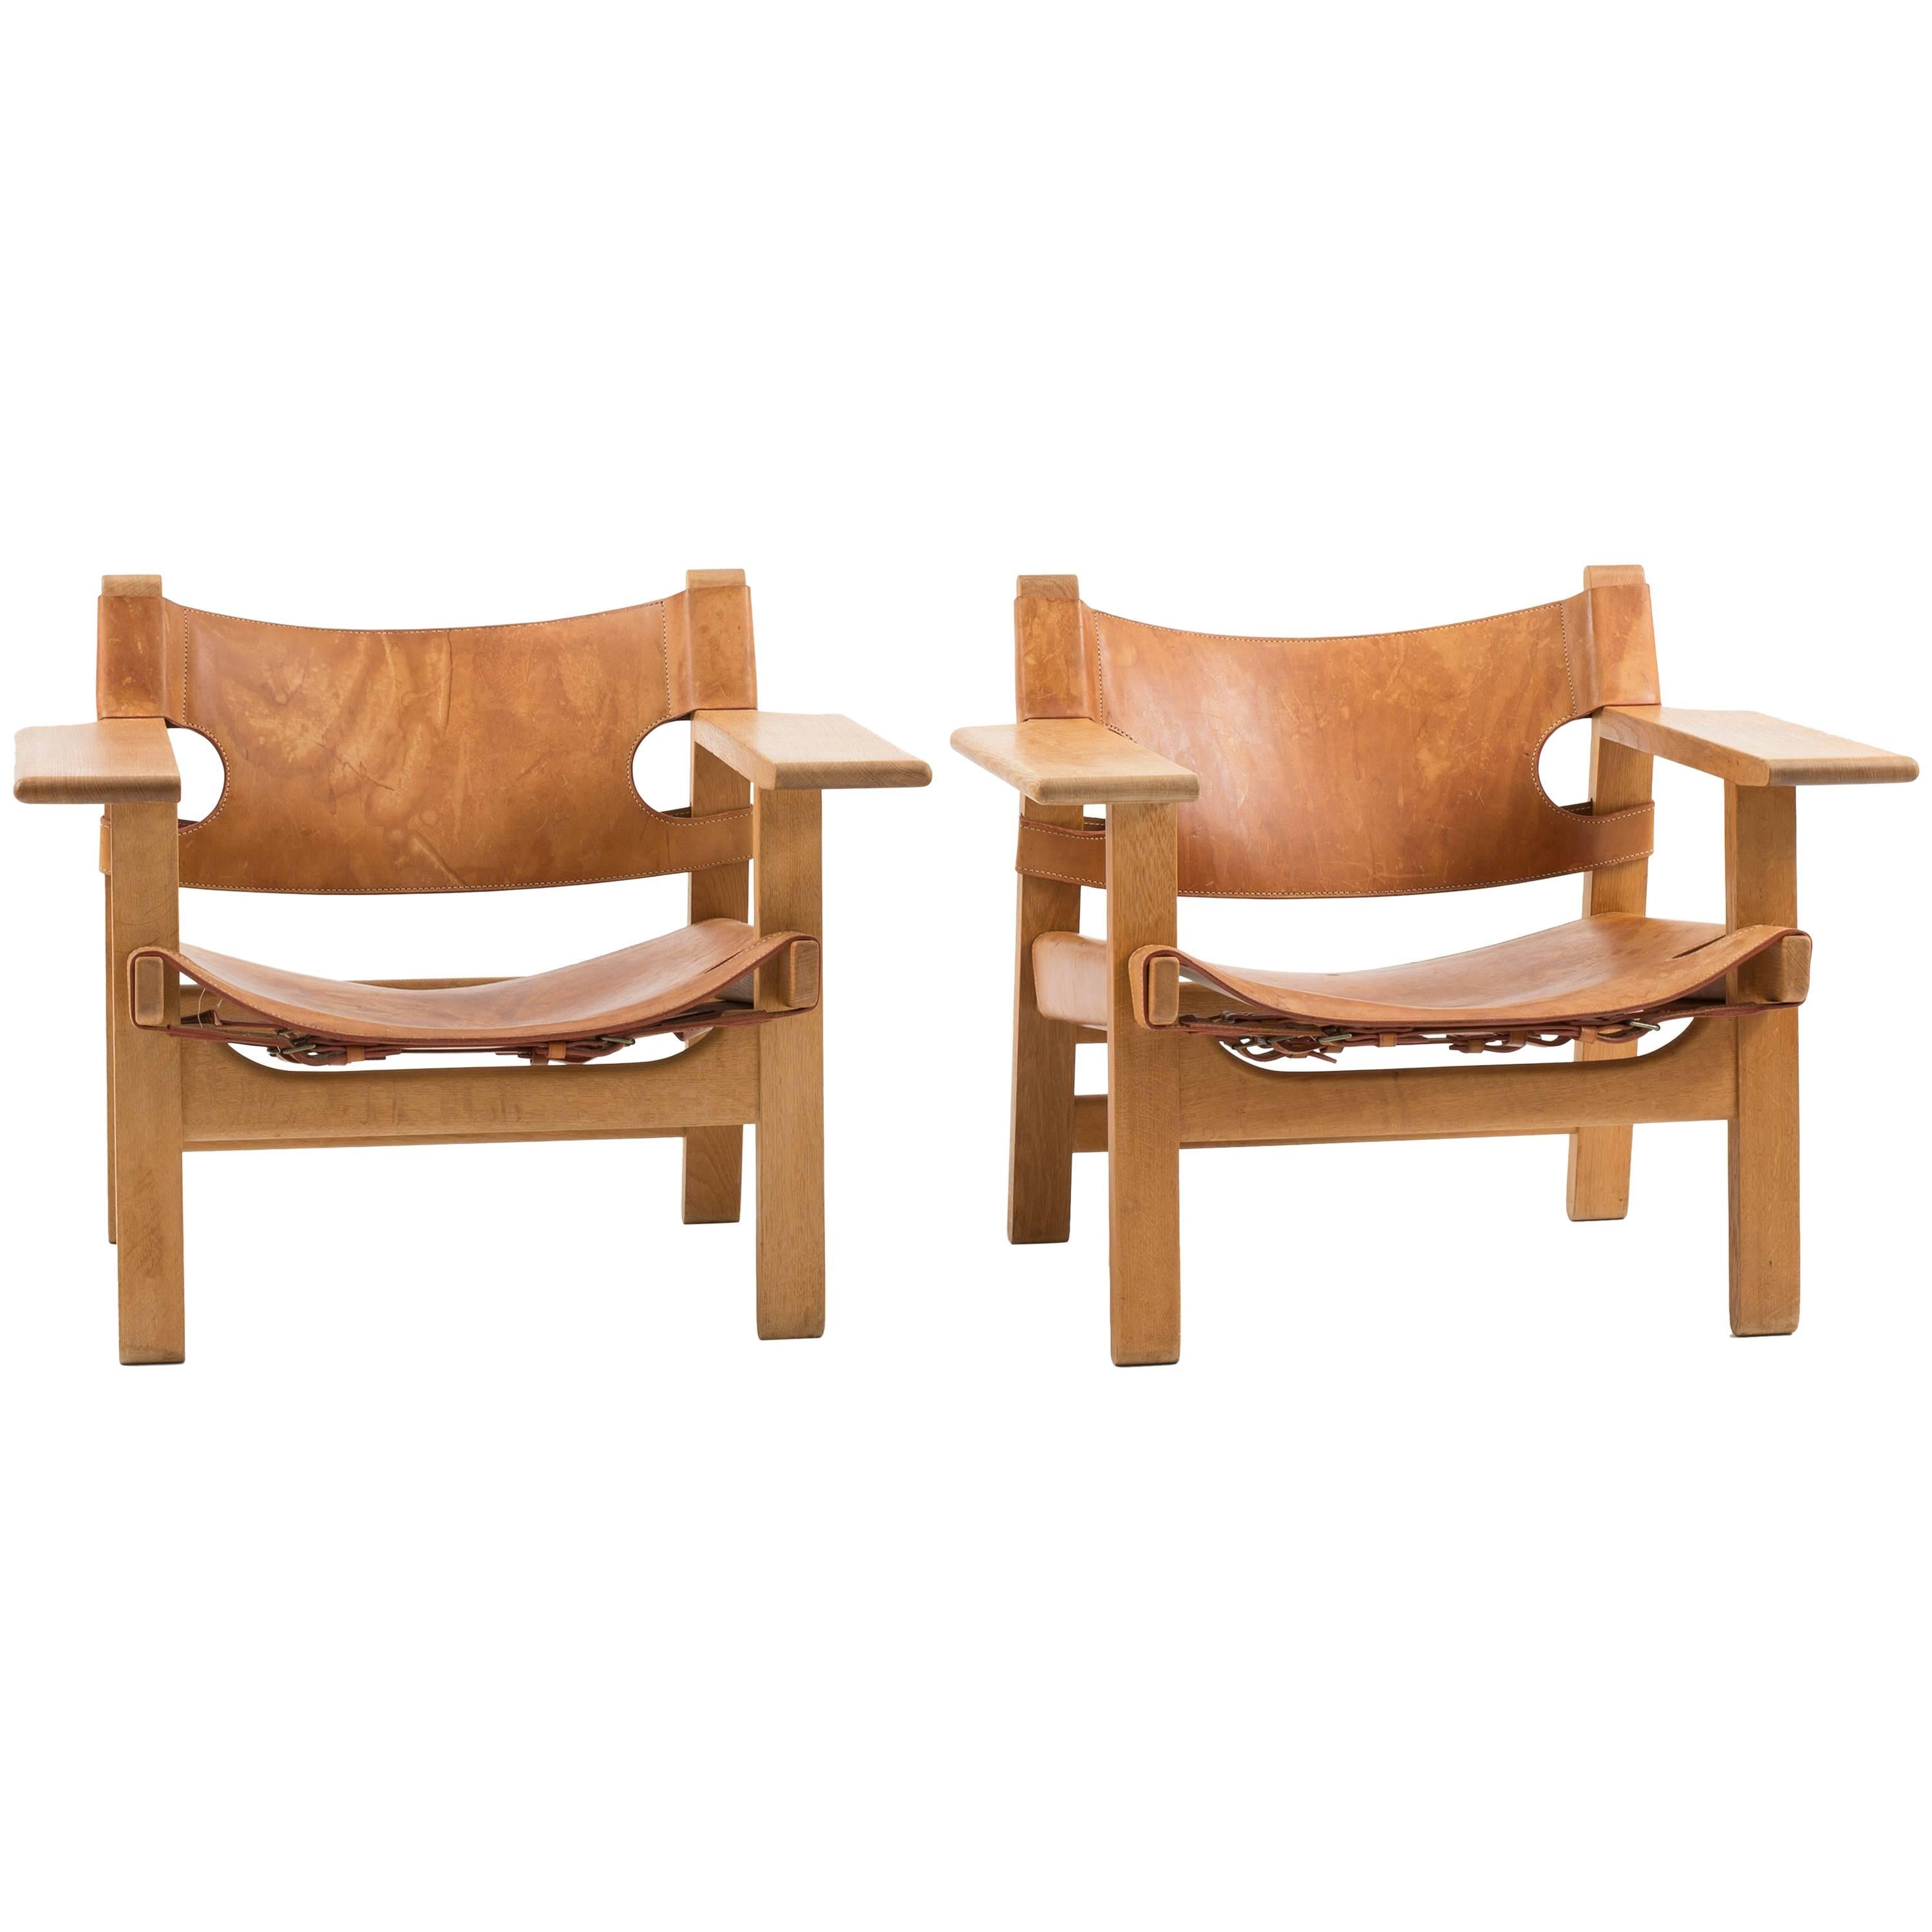 Pair of Spanish Chairs by Børge Mogensen for Fredericia Furniture